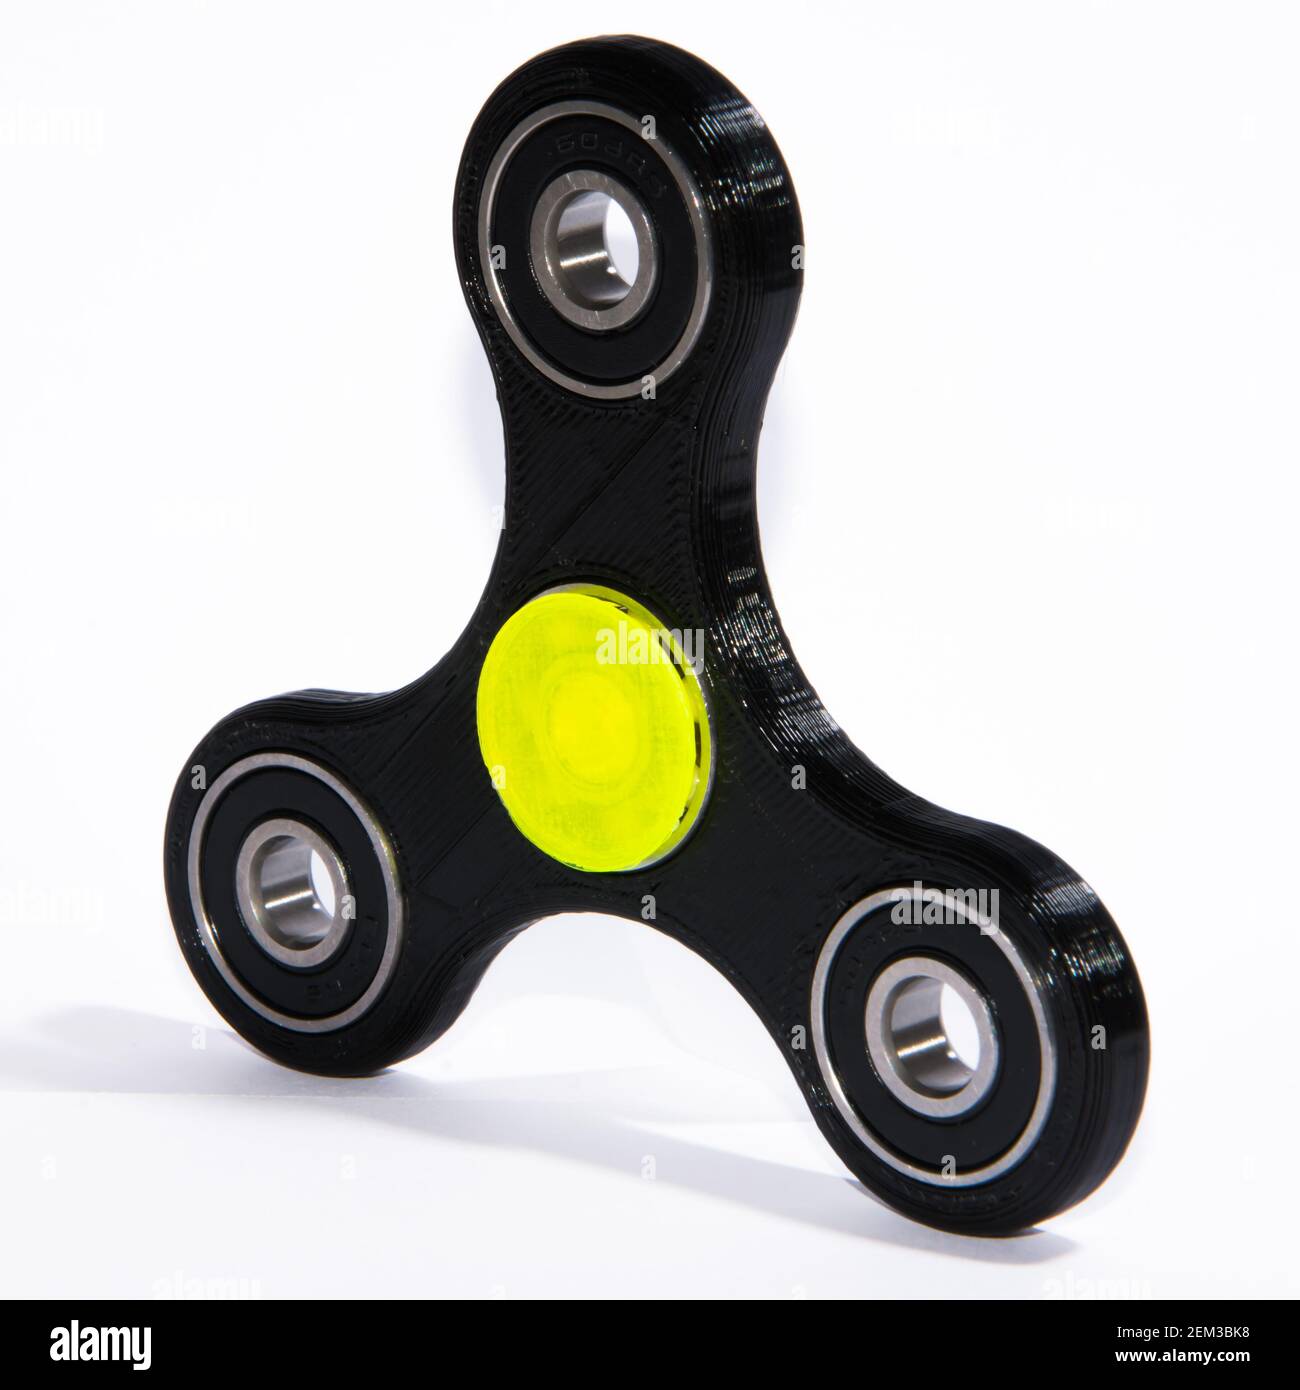 Fidget spinner to relax, relieve stress, play  Stock Photo